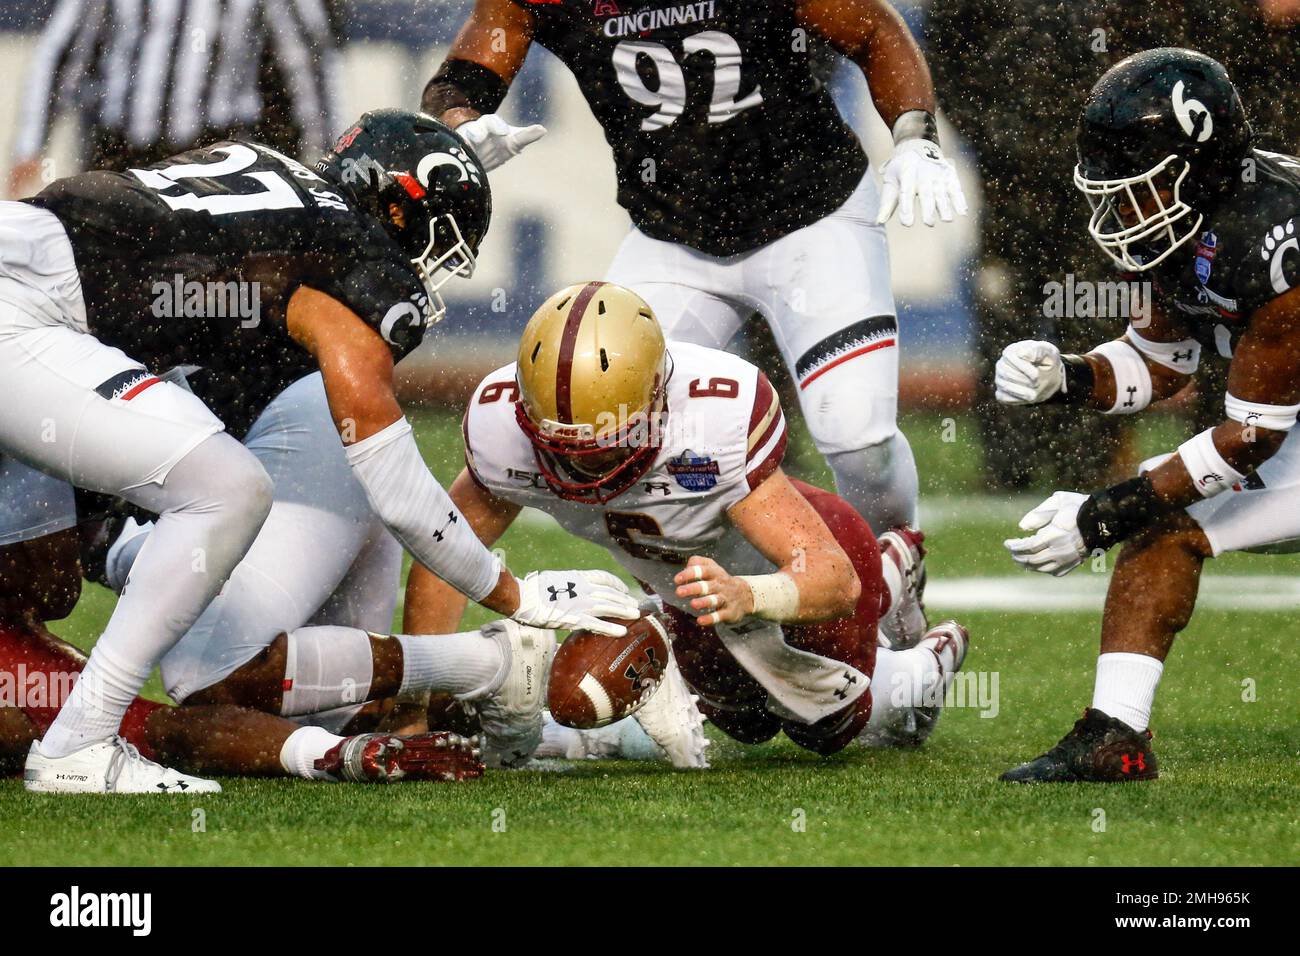 Boston College quarterback Dennis Grosel (6) recovers a fumble as